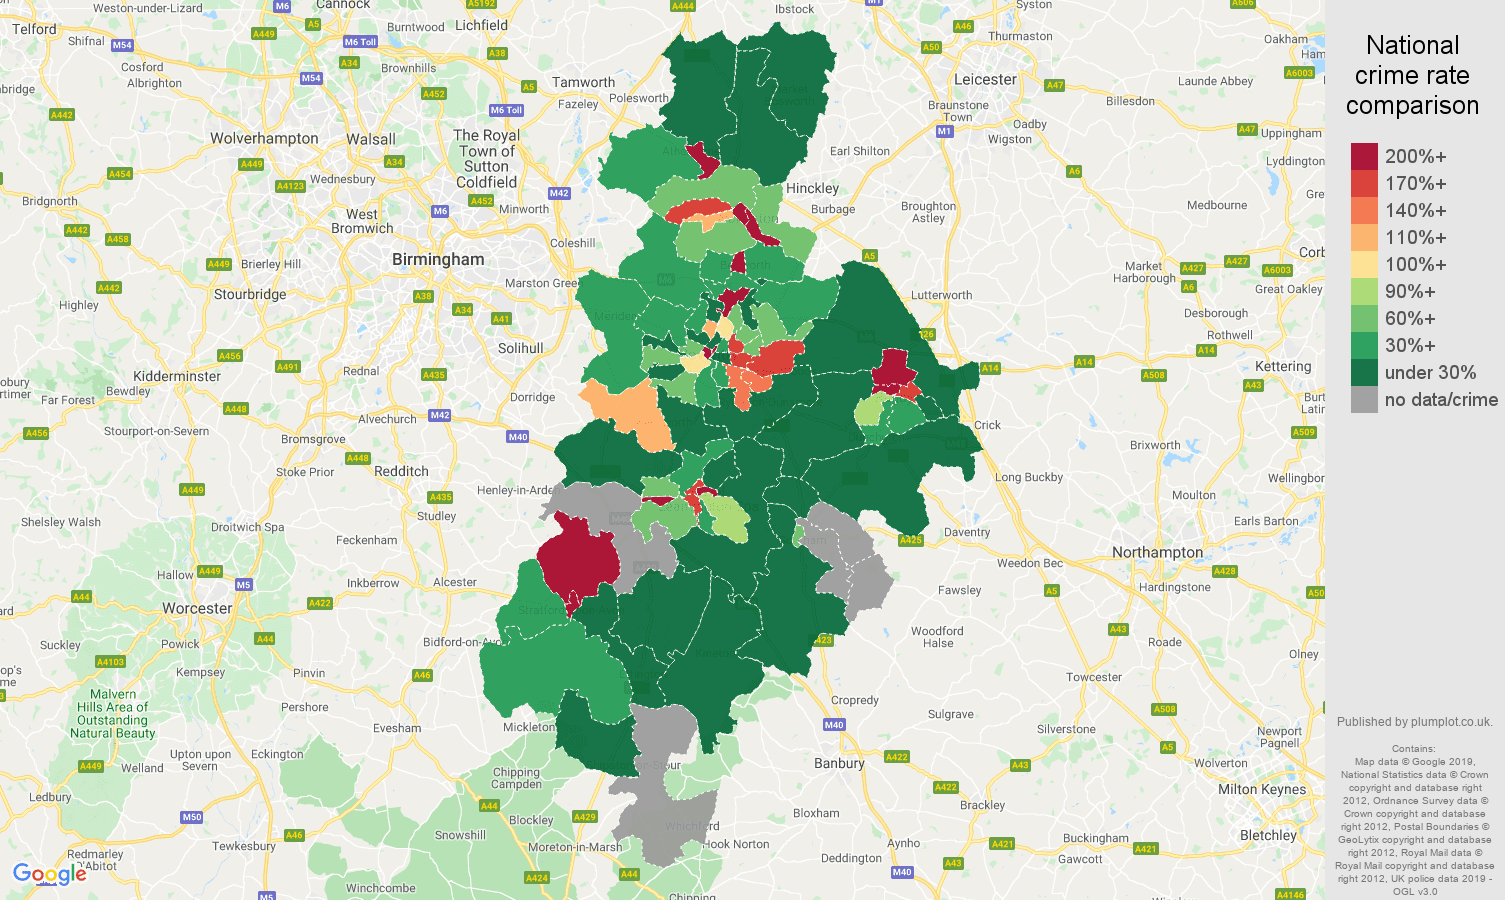 Coventry shoplifting crime rate comparison map